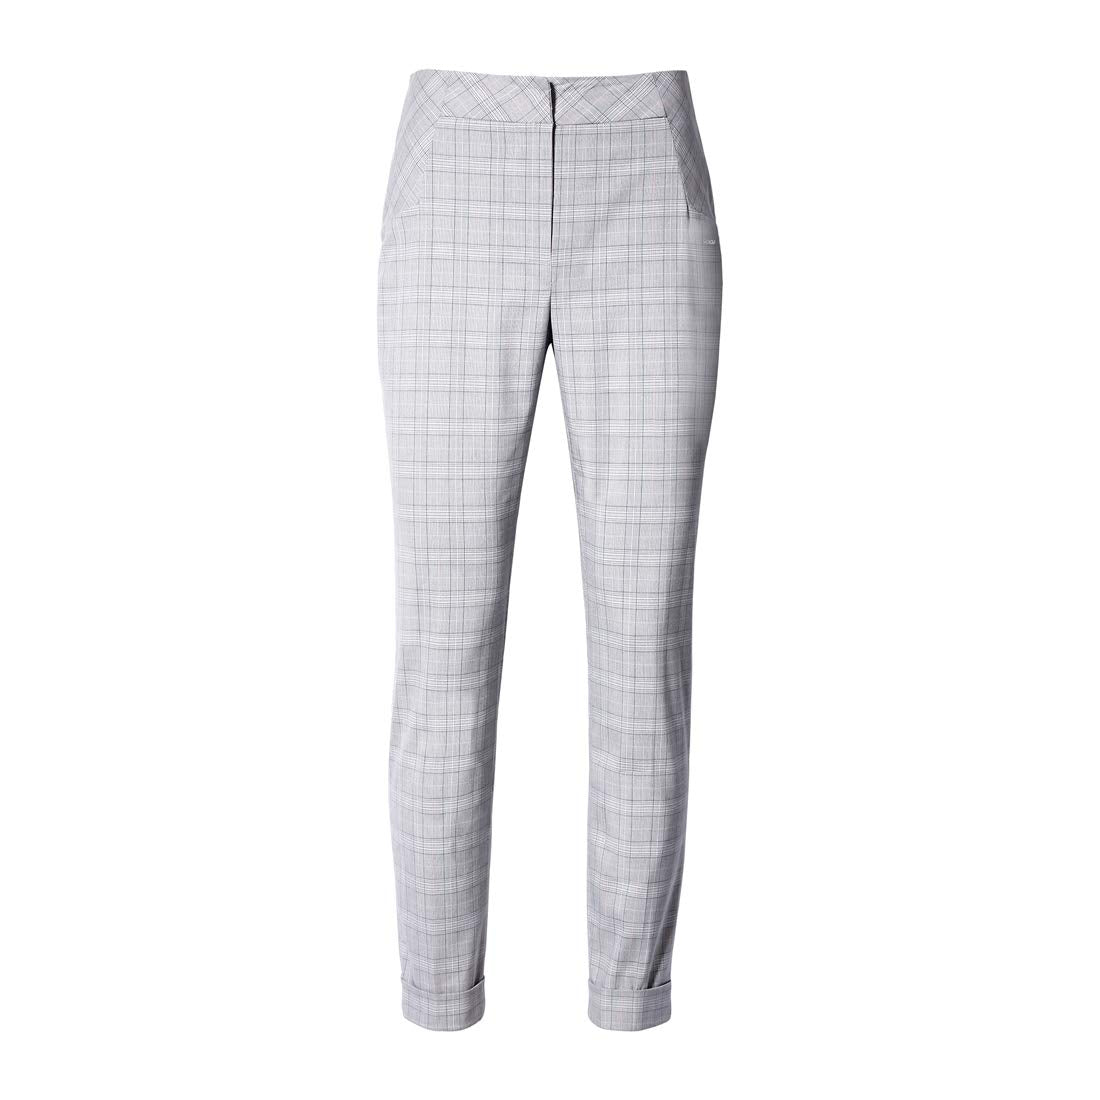 Sidiou Group Anniou Women Check Trousers Plaid High Waisted Trousers Office Lady Style Pants Suit Pants Straight Leg Pants